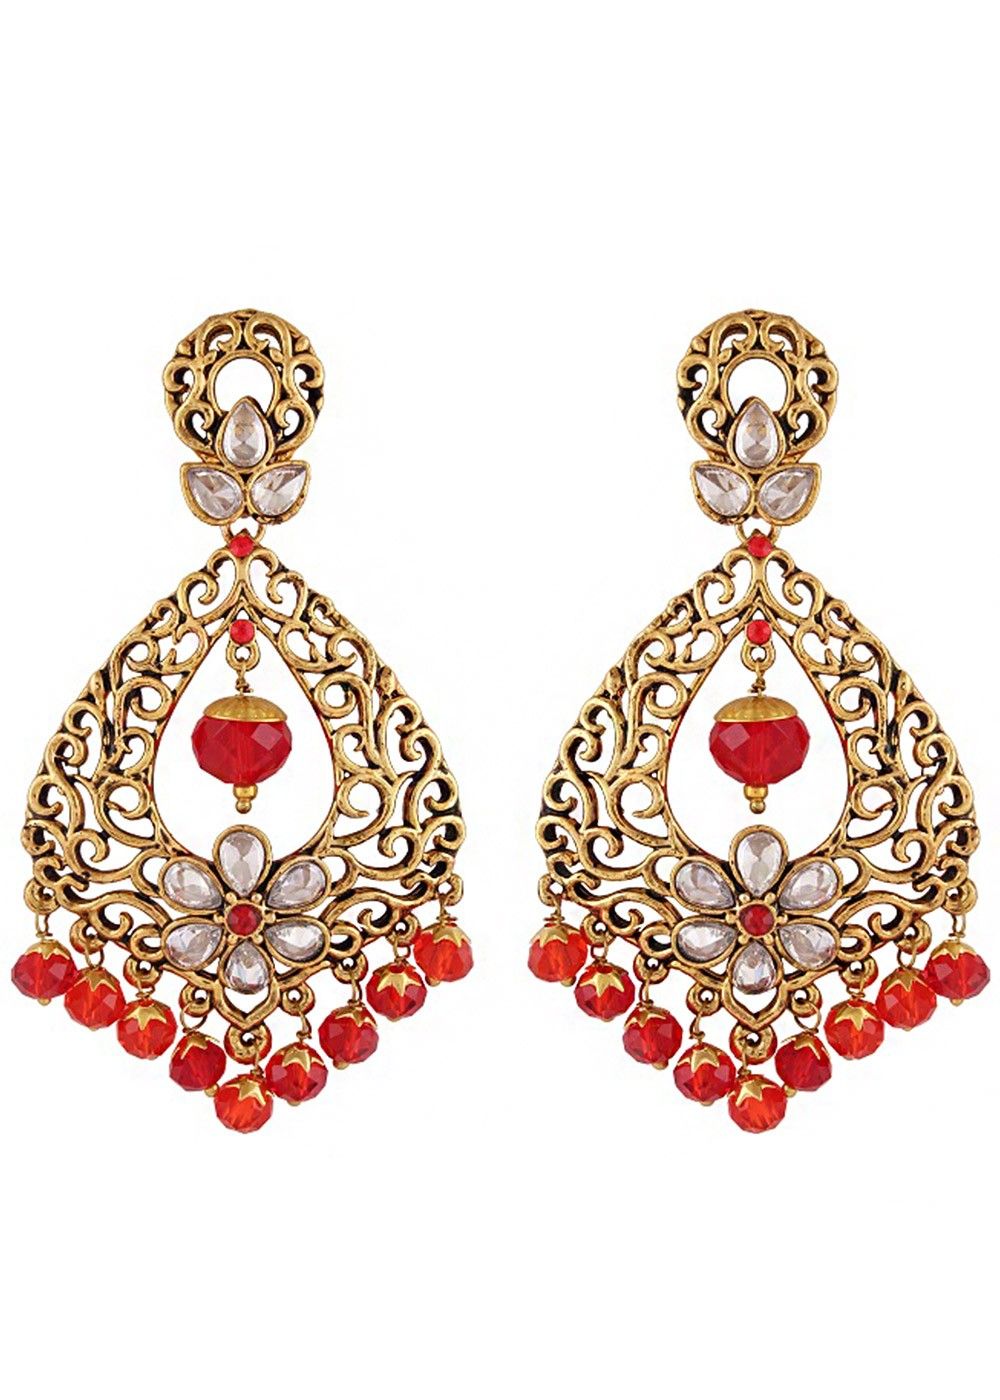 Buy online Red Brass Hoop Earrings from fashion jewellery for Women by  Bling Beautiful Accessories for 799 at 47 off  2023 Limeroadcom